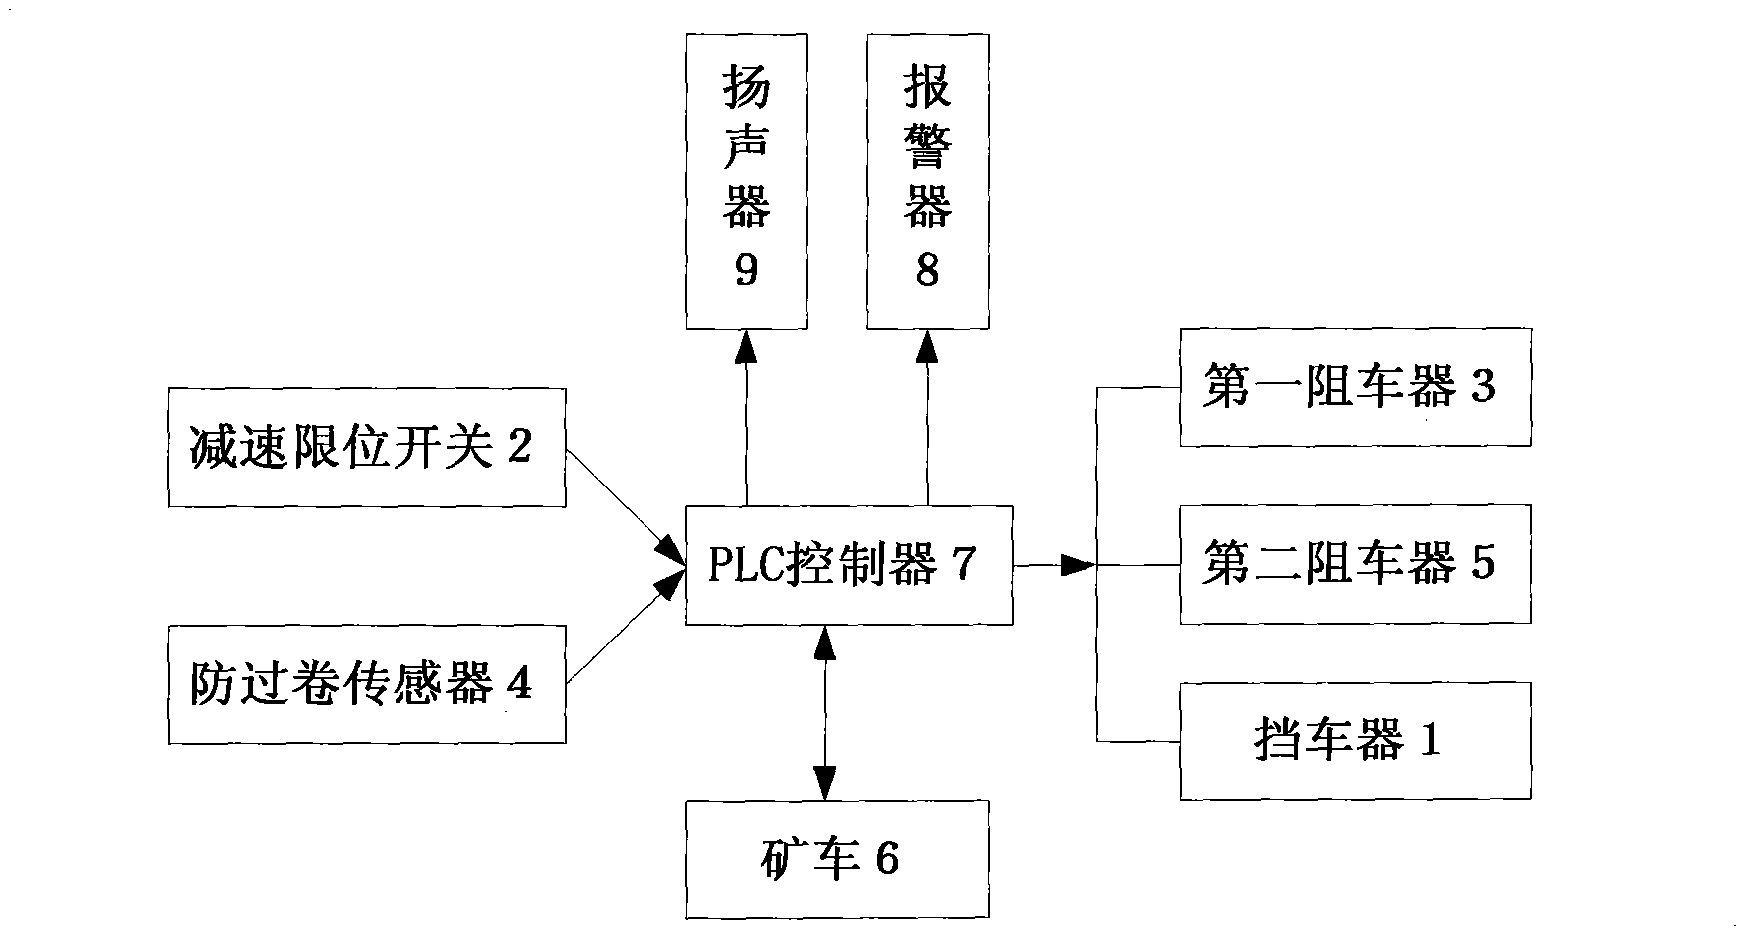 Control system of underground rock transporter in inclined drift of coal mine